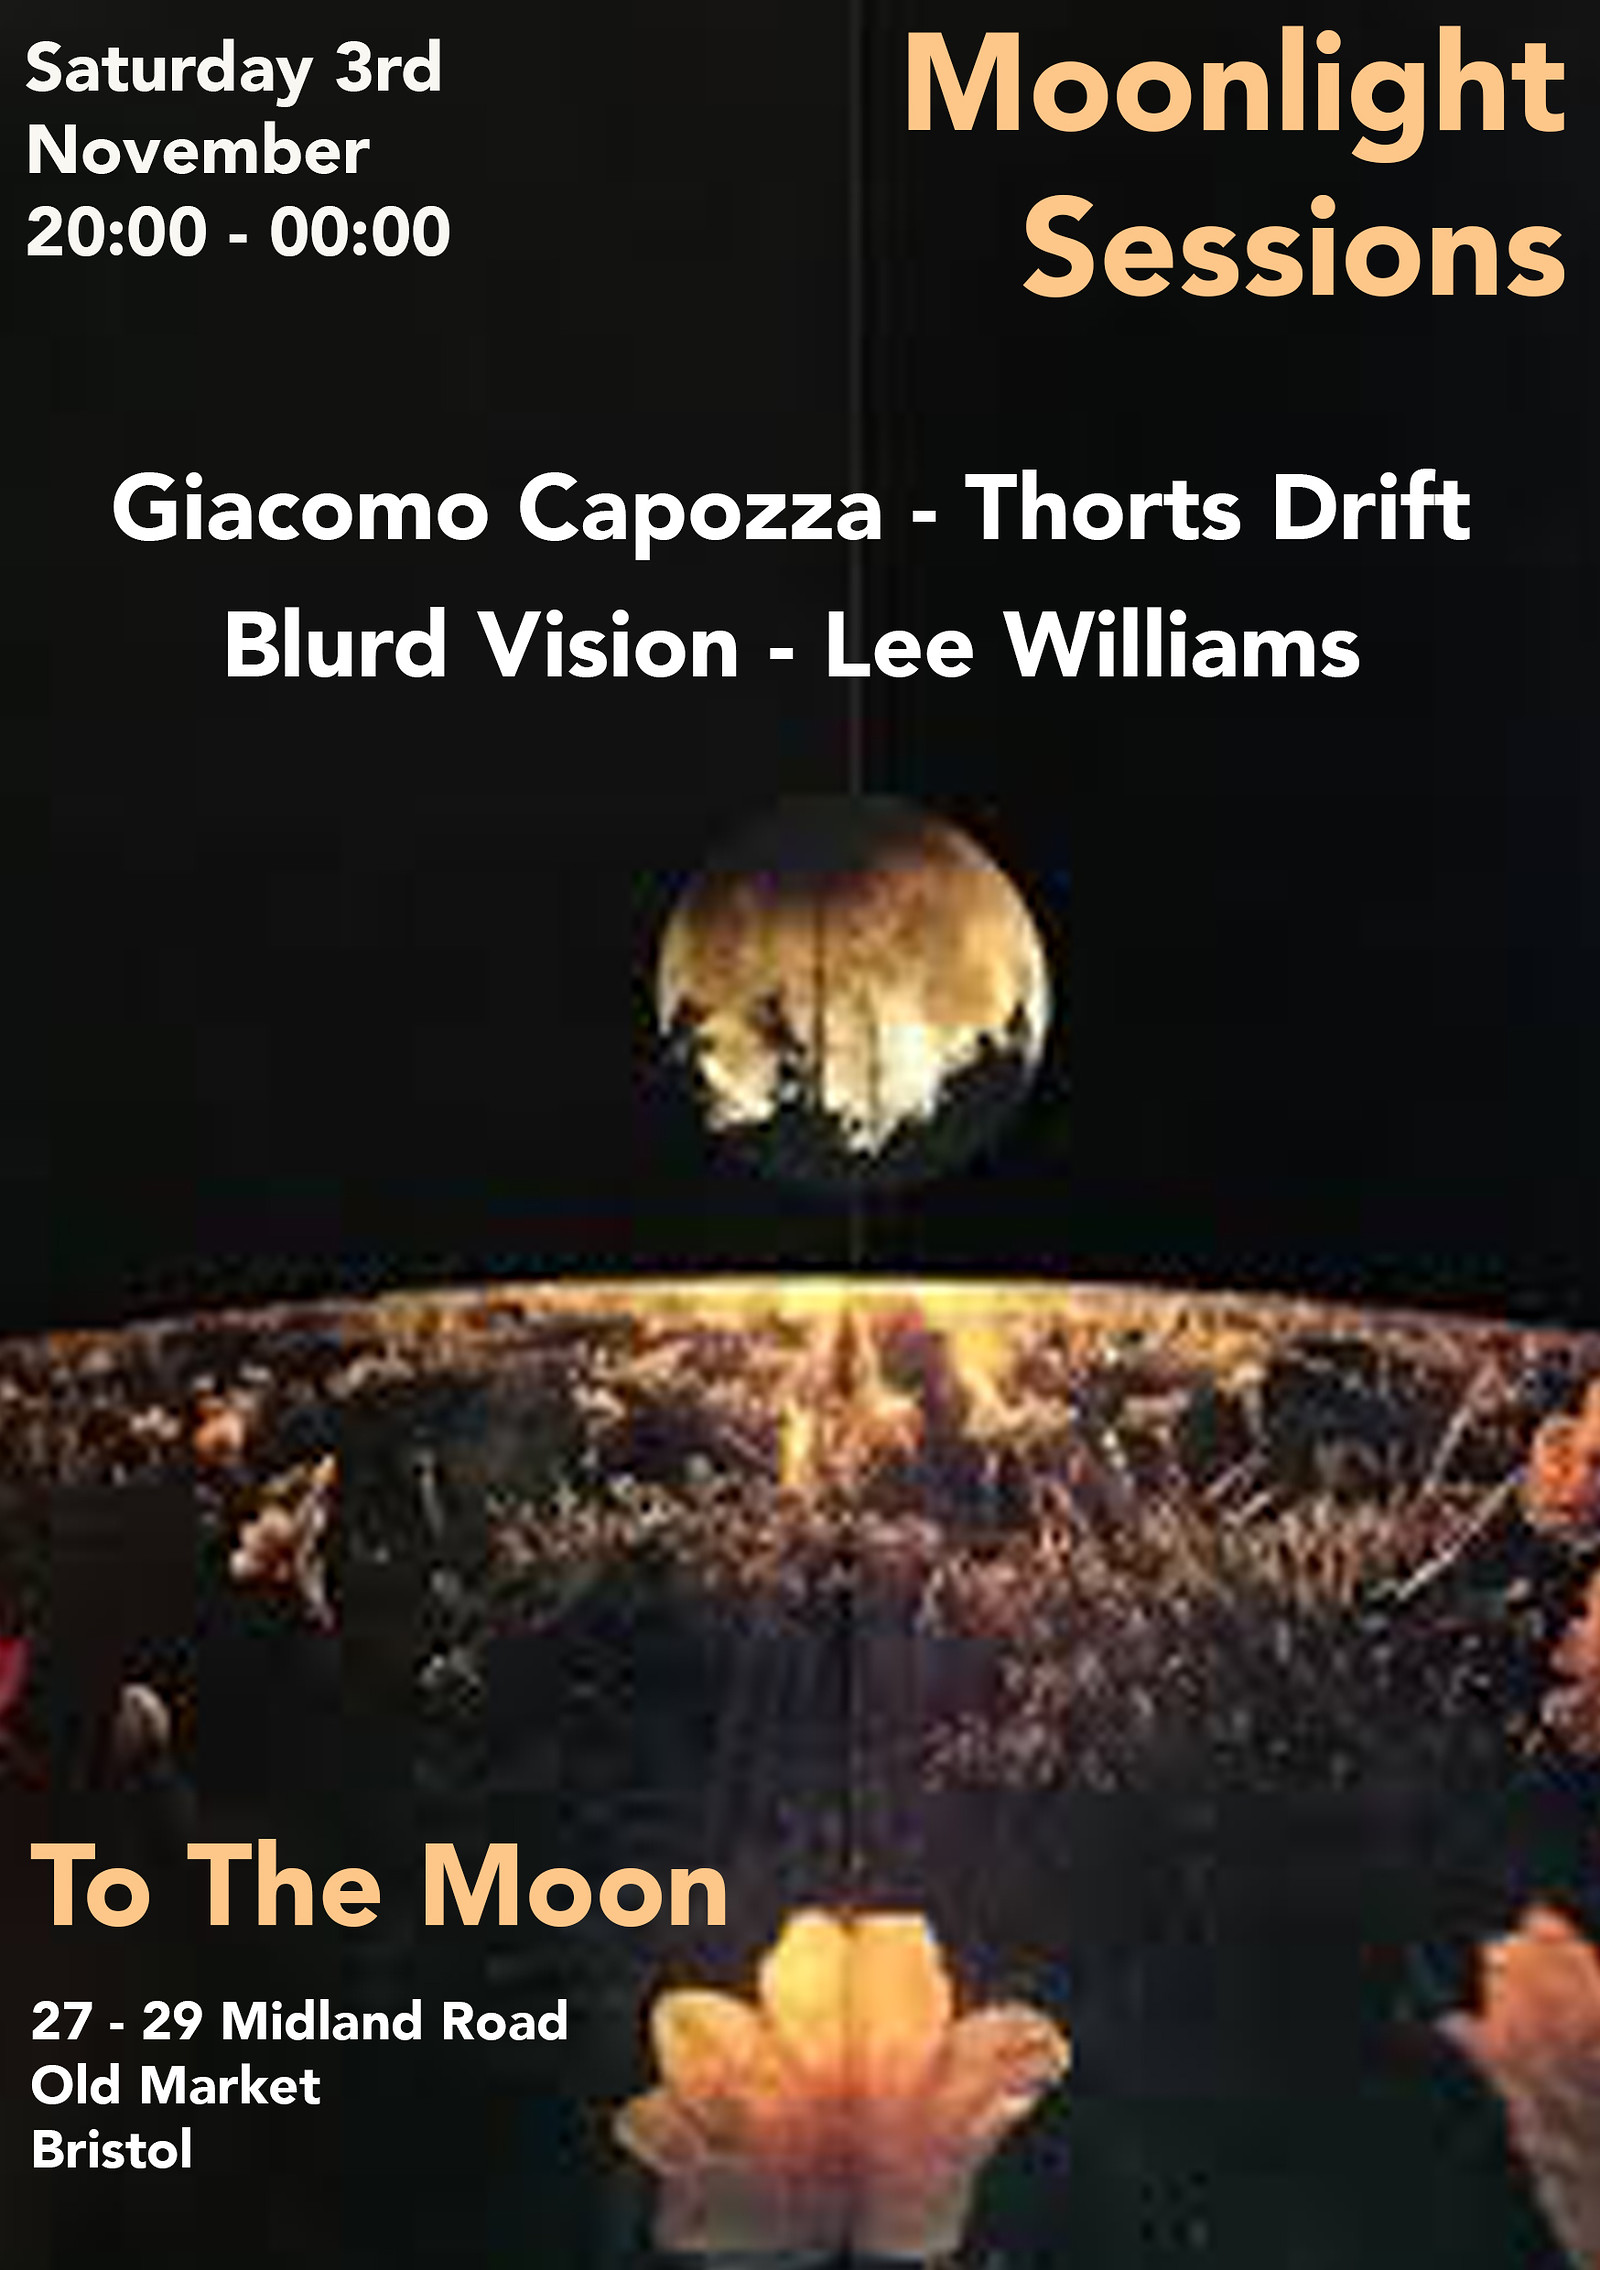 Moonlight Sessions at To The Moon